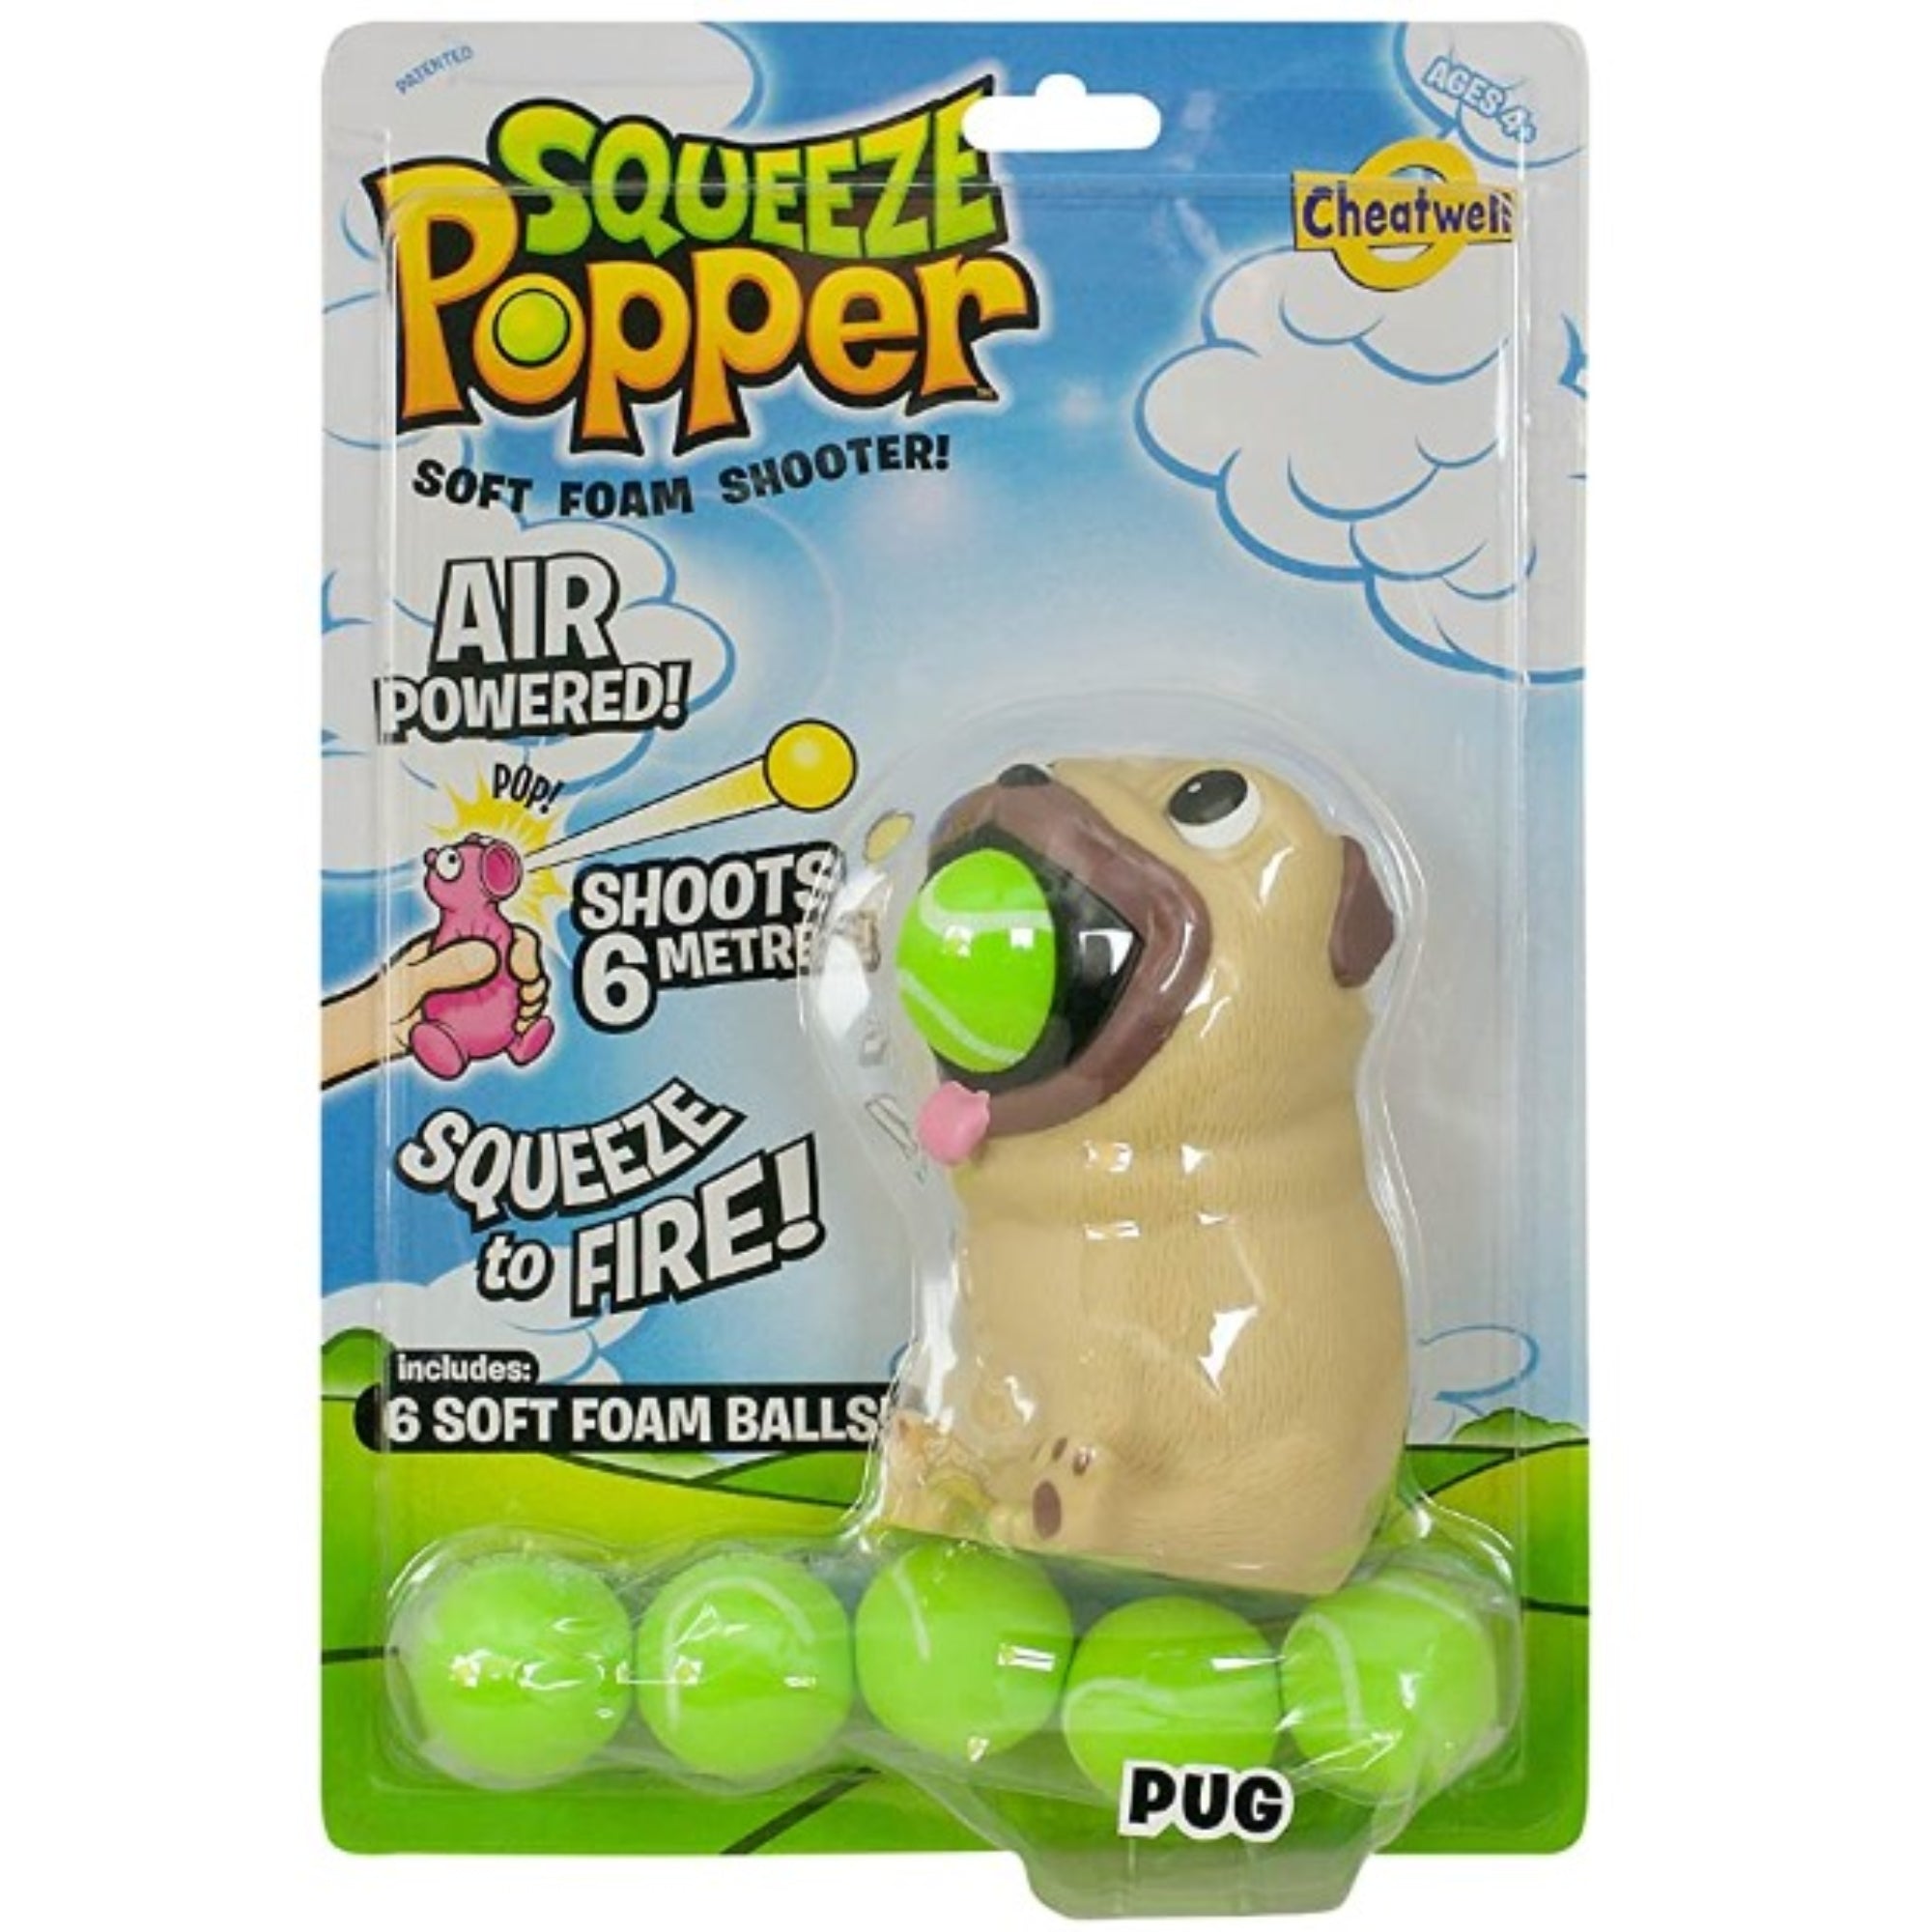 squeeze popper pug package